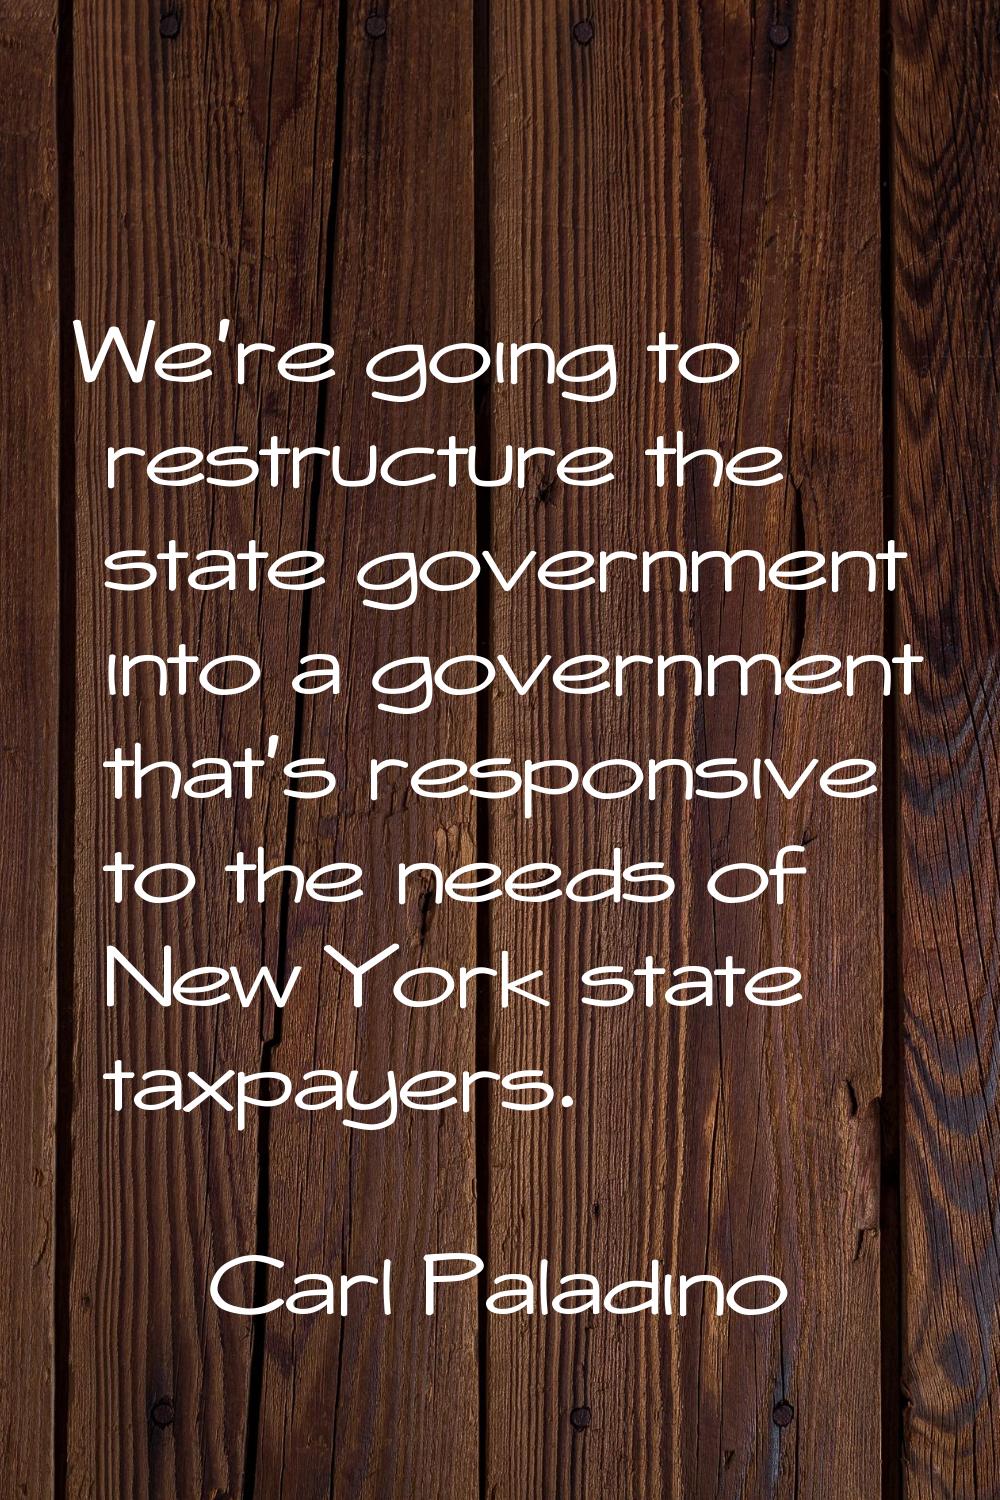 We're going to restructure the state government into a government that's responsive to the needs of